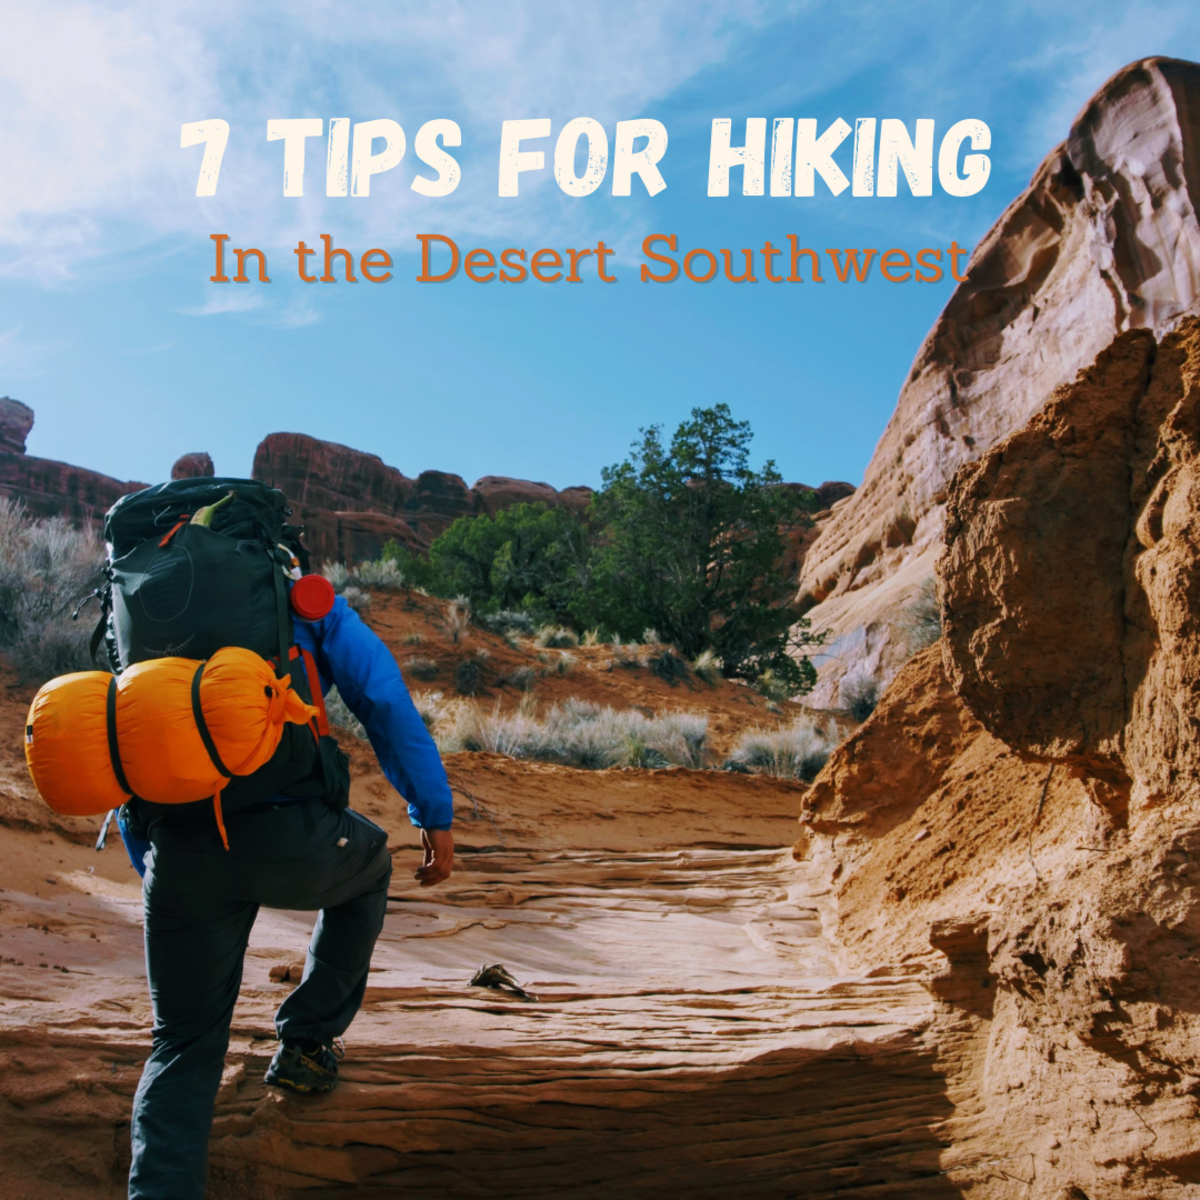 Hiking in the desert doesn't have to be difficult. Here's some advice to get you started!